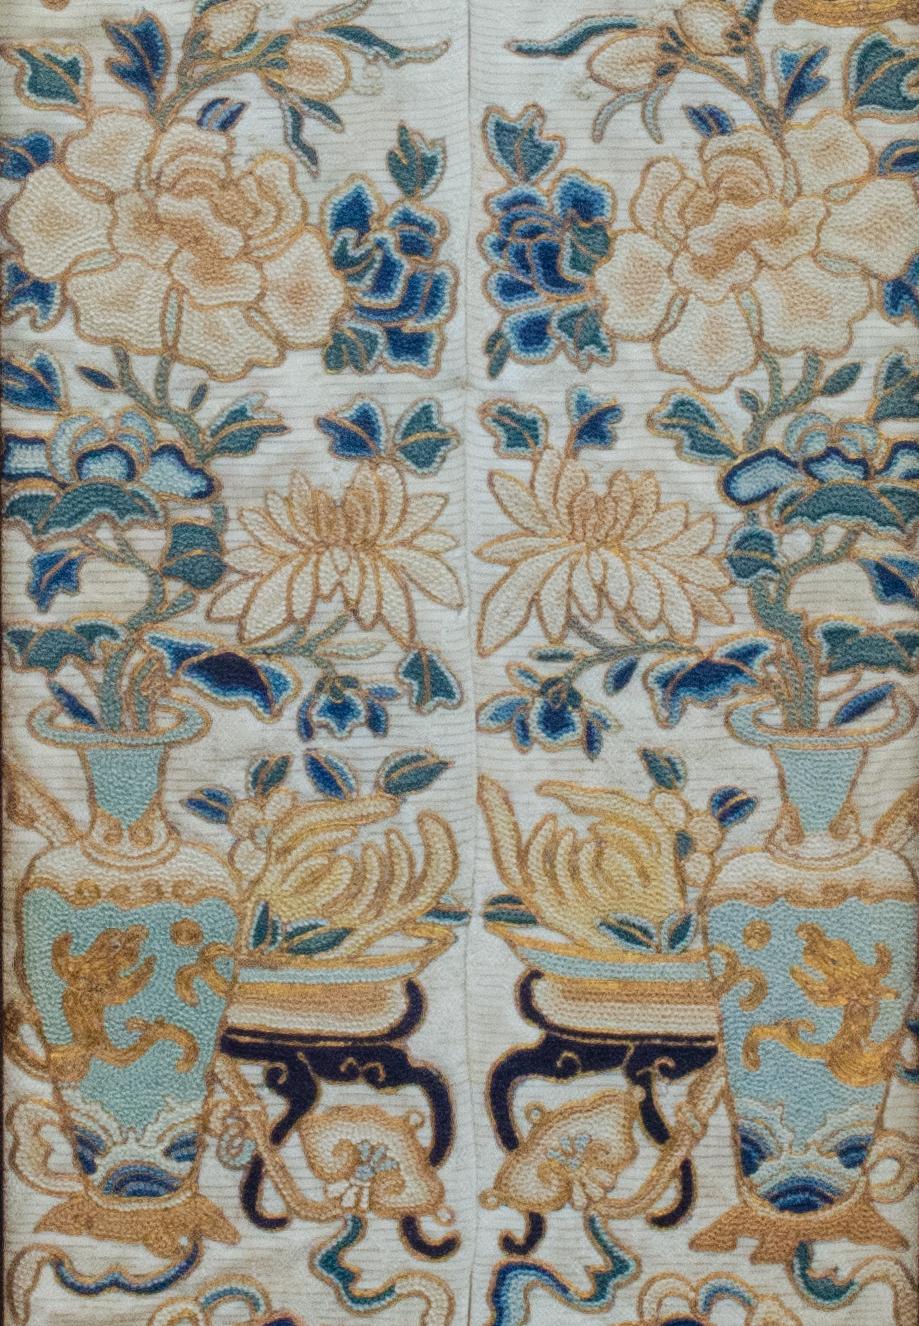 Embroidered Textile, Late Qing Dynasty, c. 1850-1900
24 1/2 x 7 1/2 x 1/2 in.

Chinese embroidery has a long history since the Neolithic age. Because of the quality of silk fibre, most Chinese fine embroideries are made in silk. Some ancient